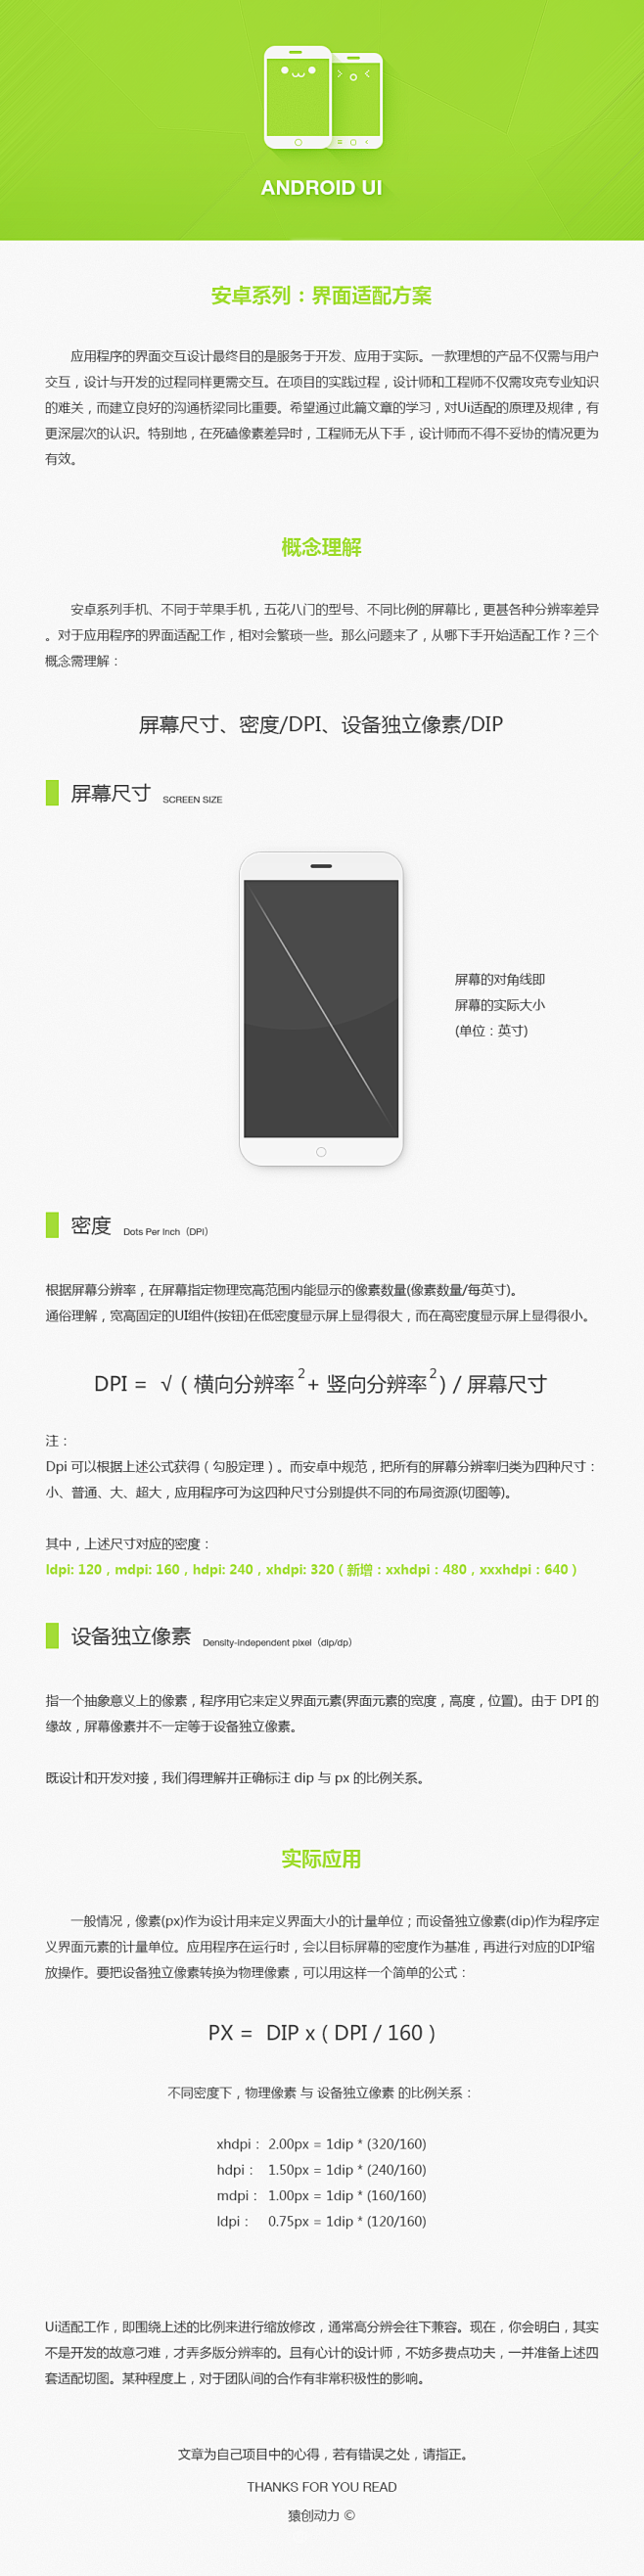 Android系列：UI适配方案-UI中...